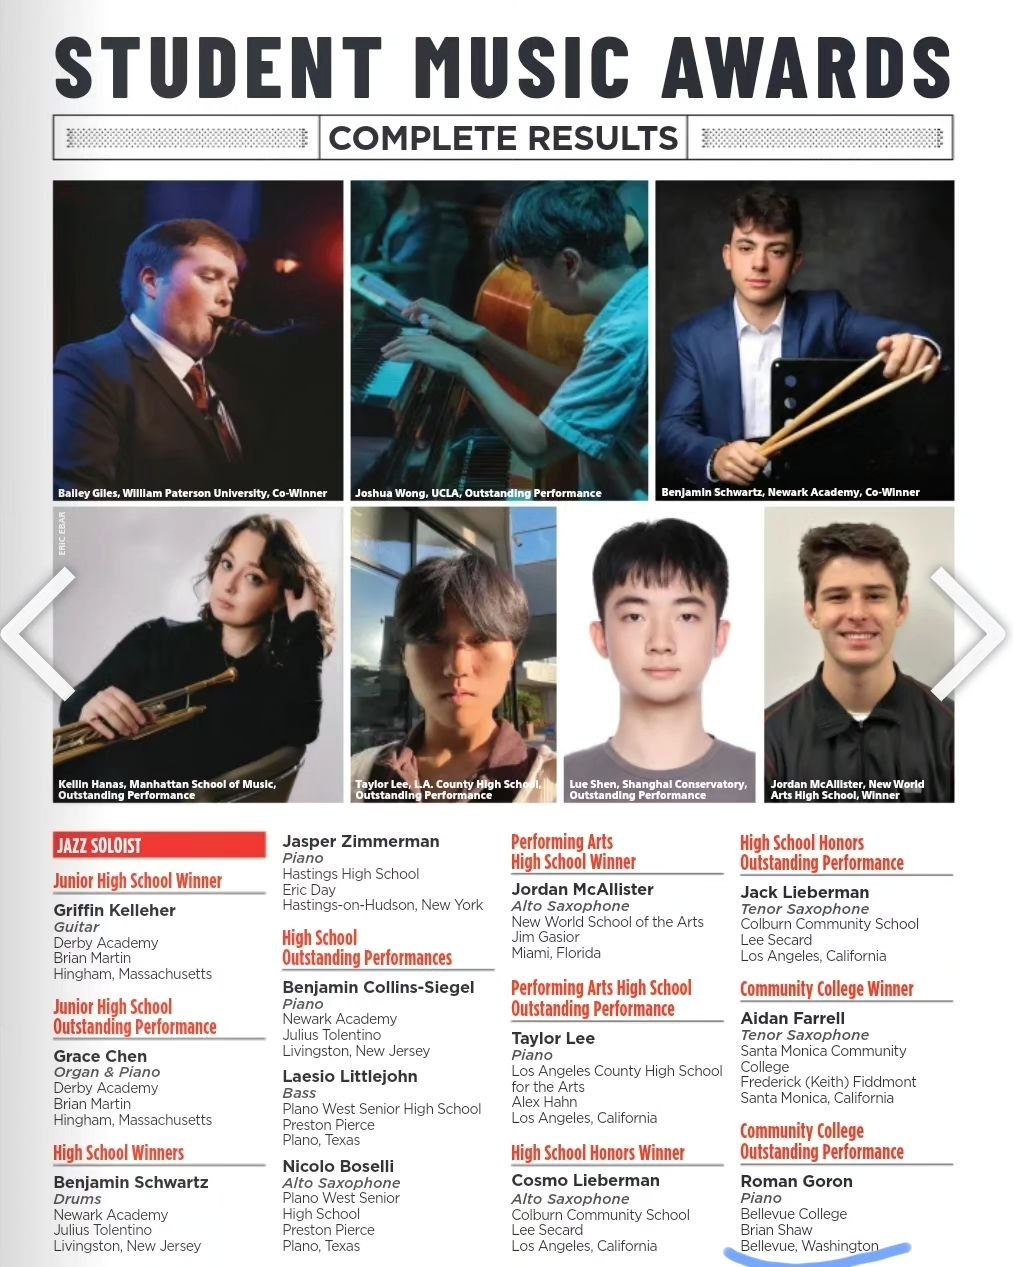 Super grateful to have been recognized for Outstanding Performance as well as Composition for the 47th Annual Downbeat Student Music Awards. Thank you @downbeat_mag!